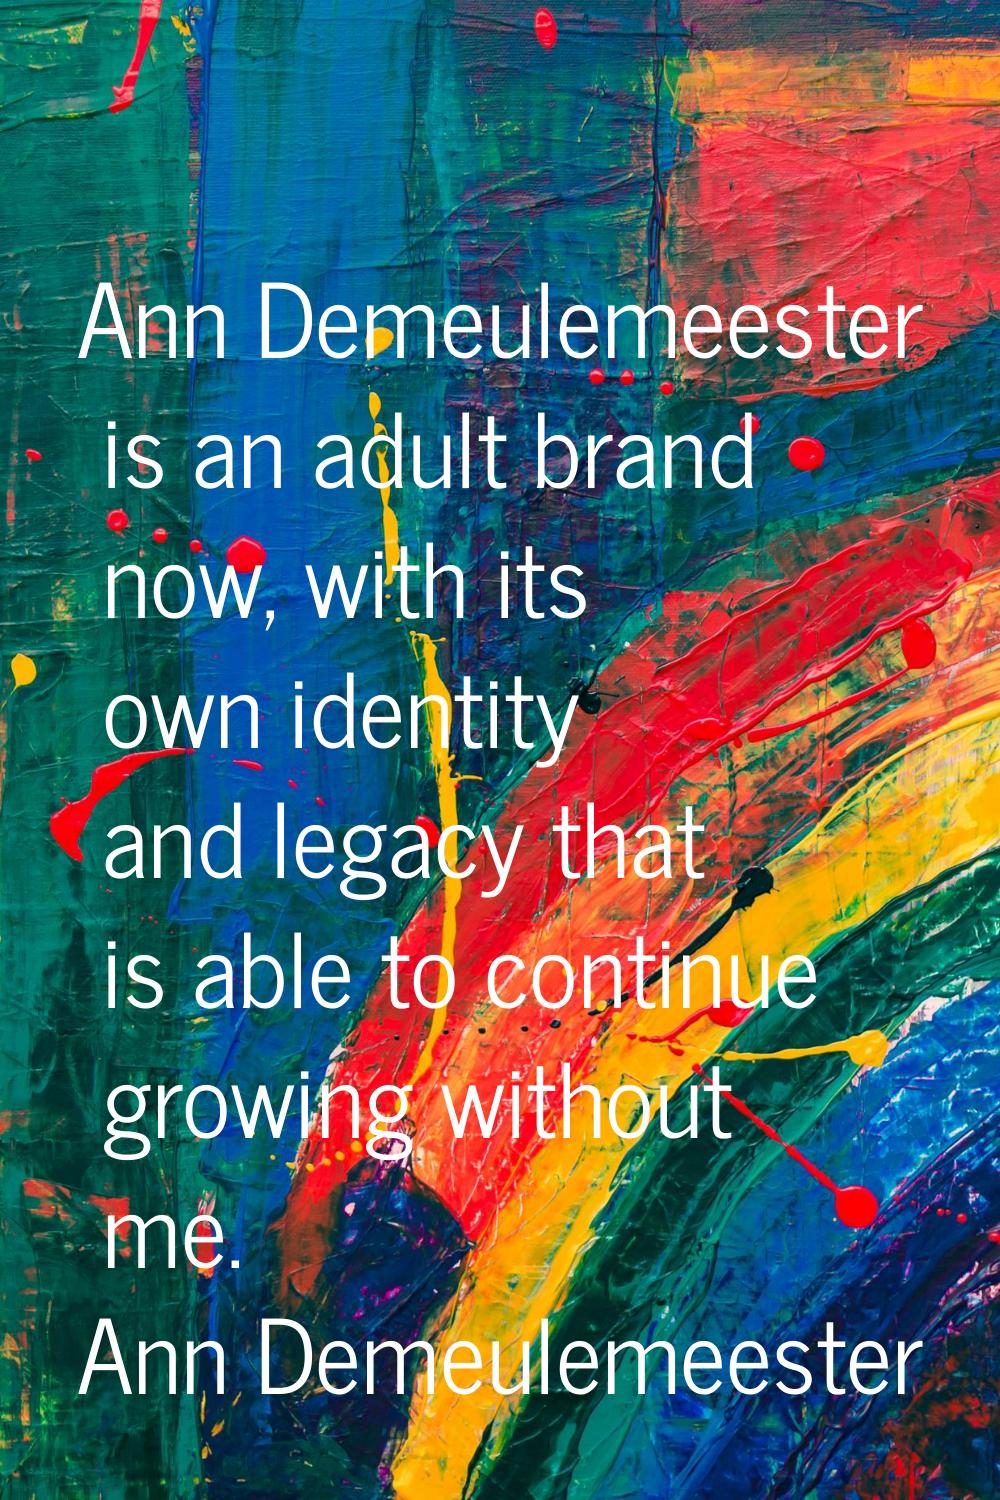 Ann Demeulemeester is an adult brand now, with its own identity and legacy that is able to continue